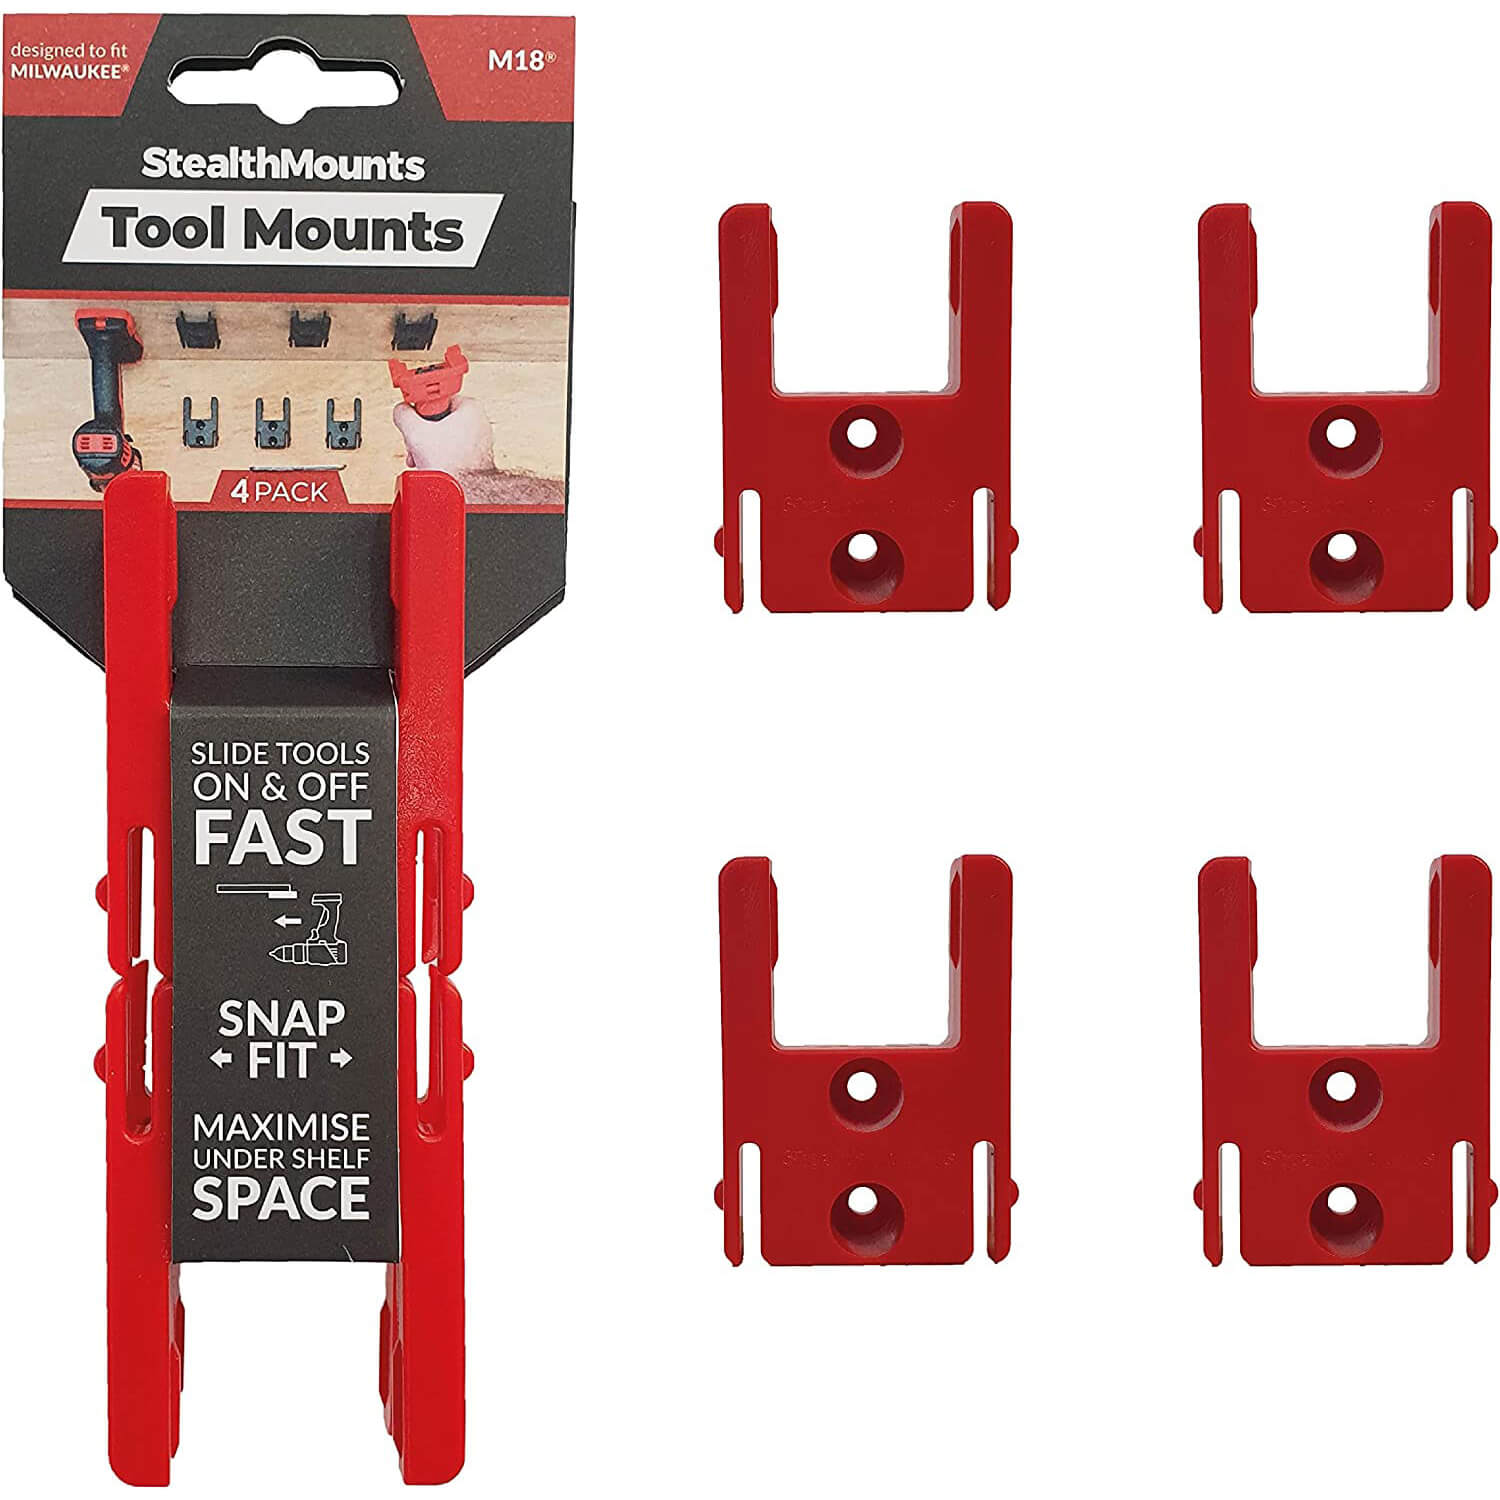 Stealth Mounts 4 Pack Tool Mounts for Milwaukee 18v M18 Tools Red